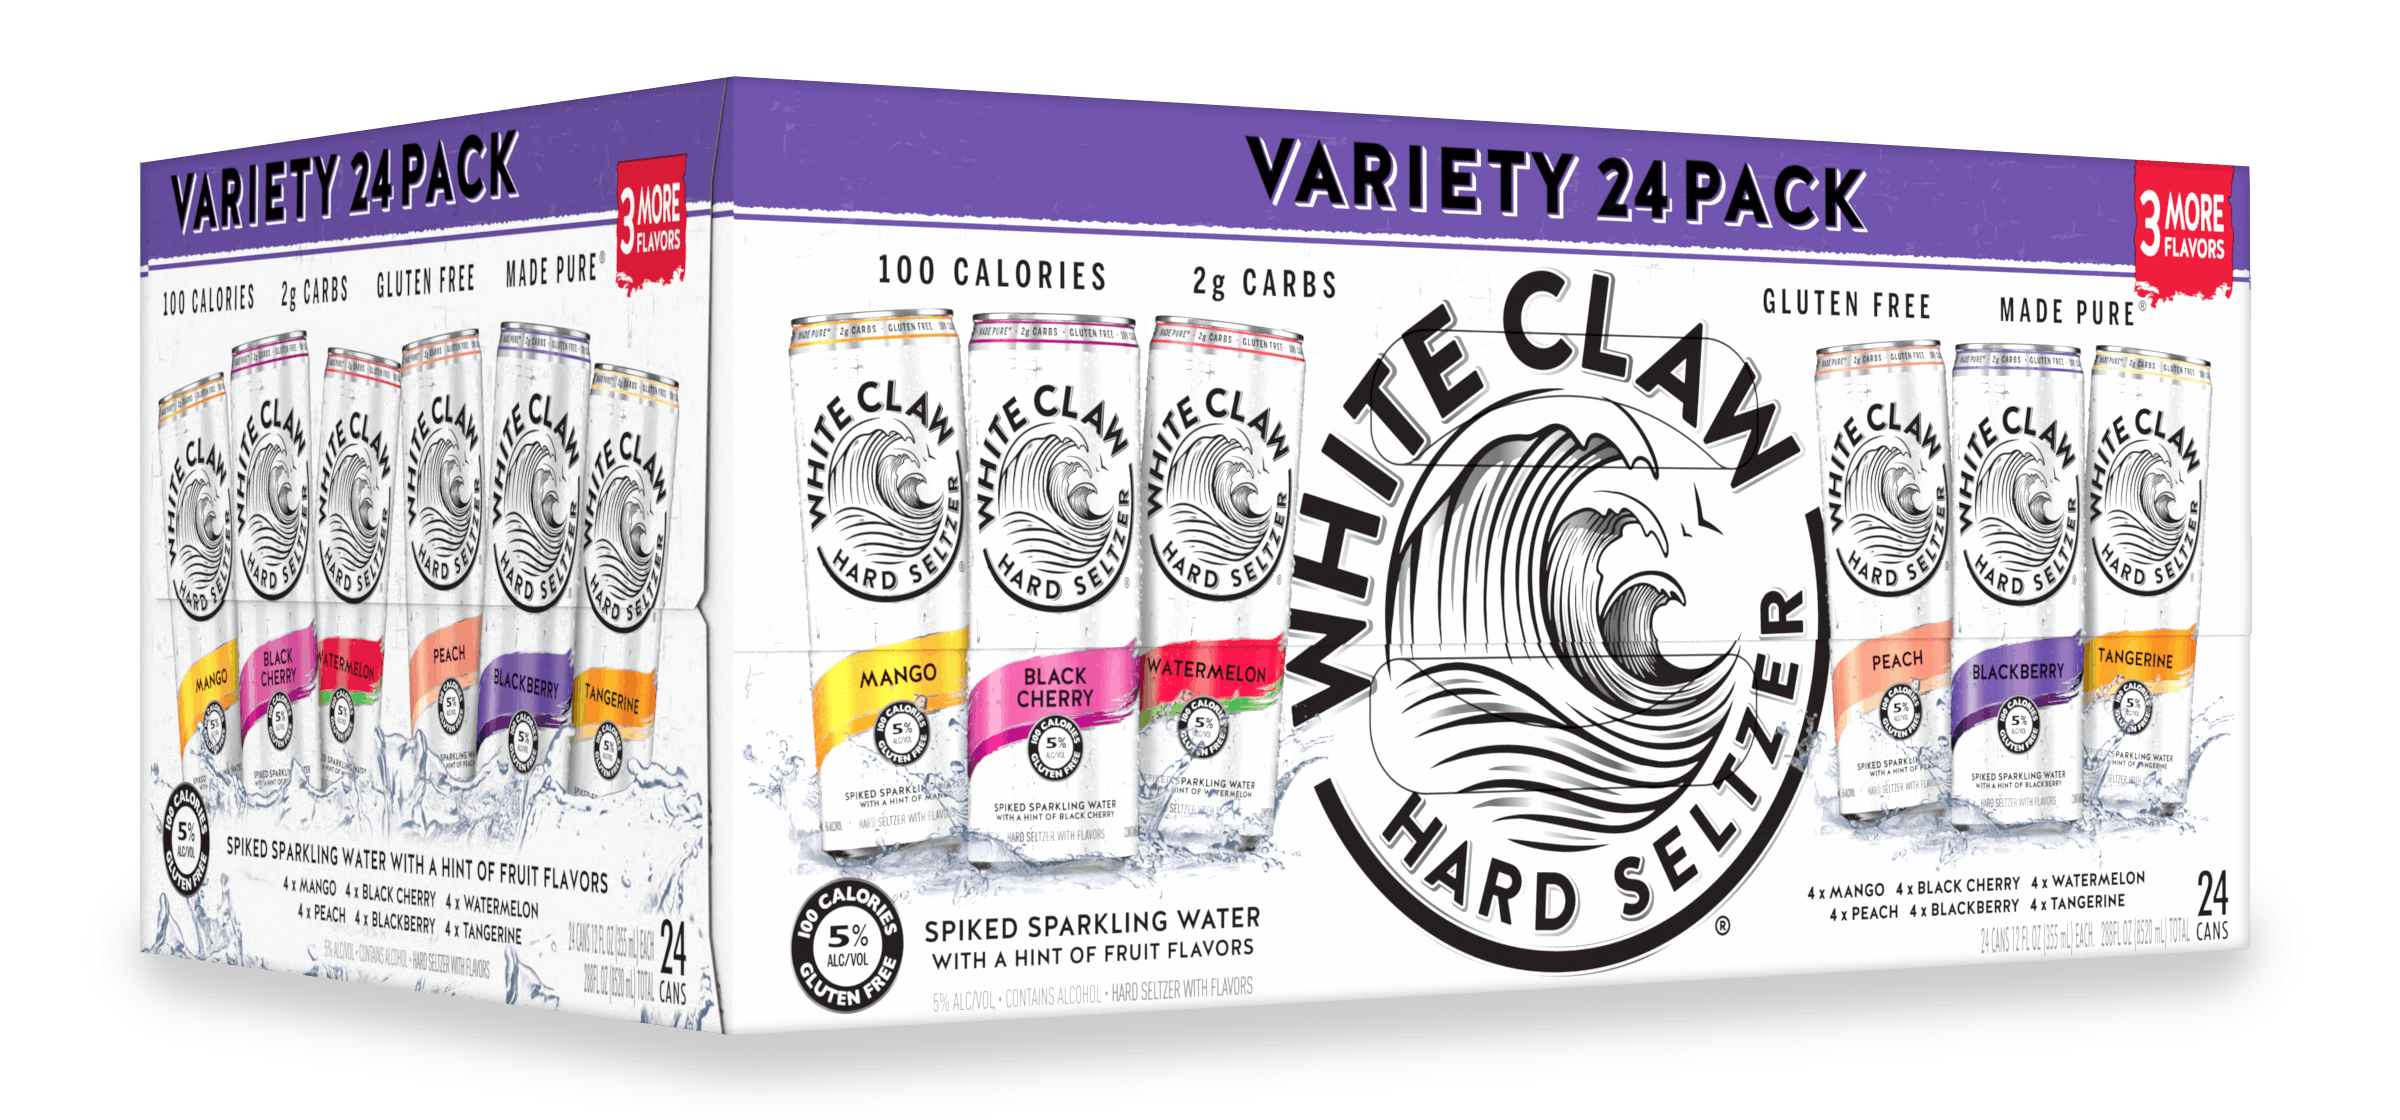 White Claw® Variety 24 Pack White Claw® Hard Seltzer